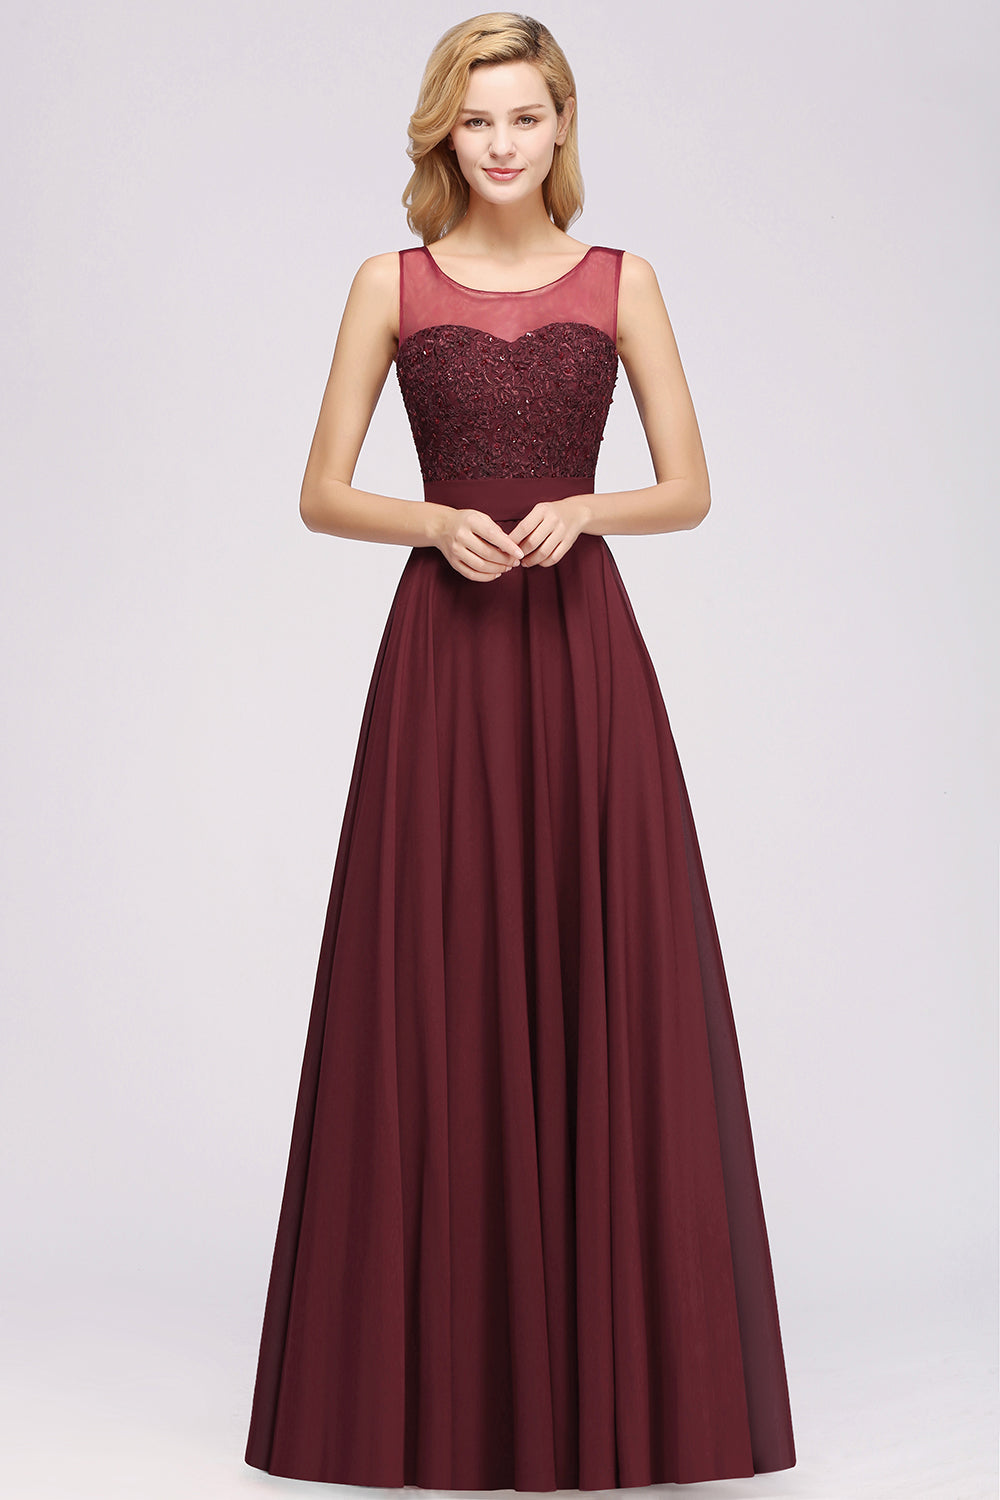 Long A-Line Chiffon Tulle Lace Jewel Bridesmaid Dresses with Sash-BIZTUNNEL